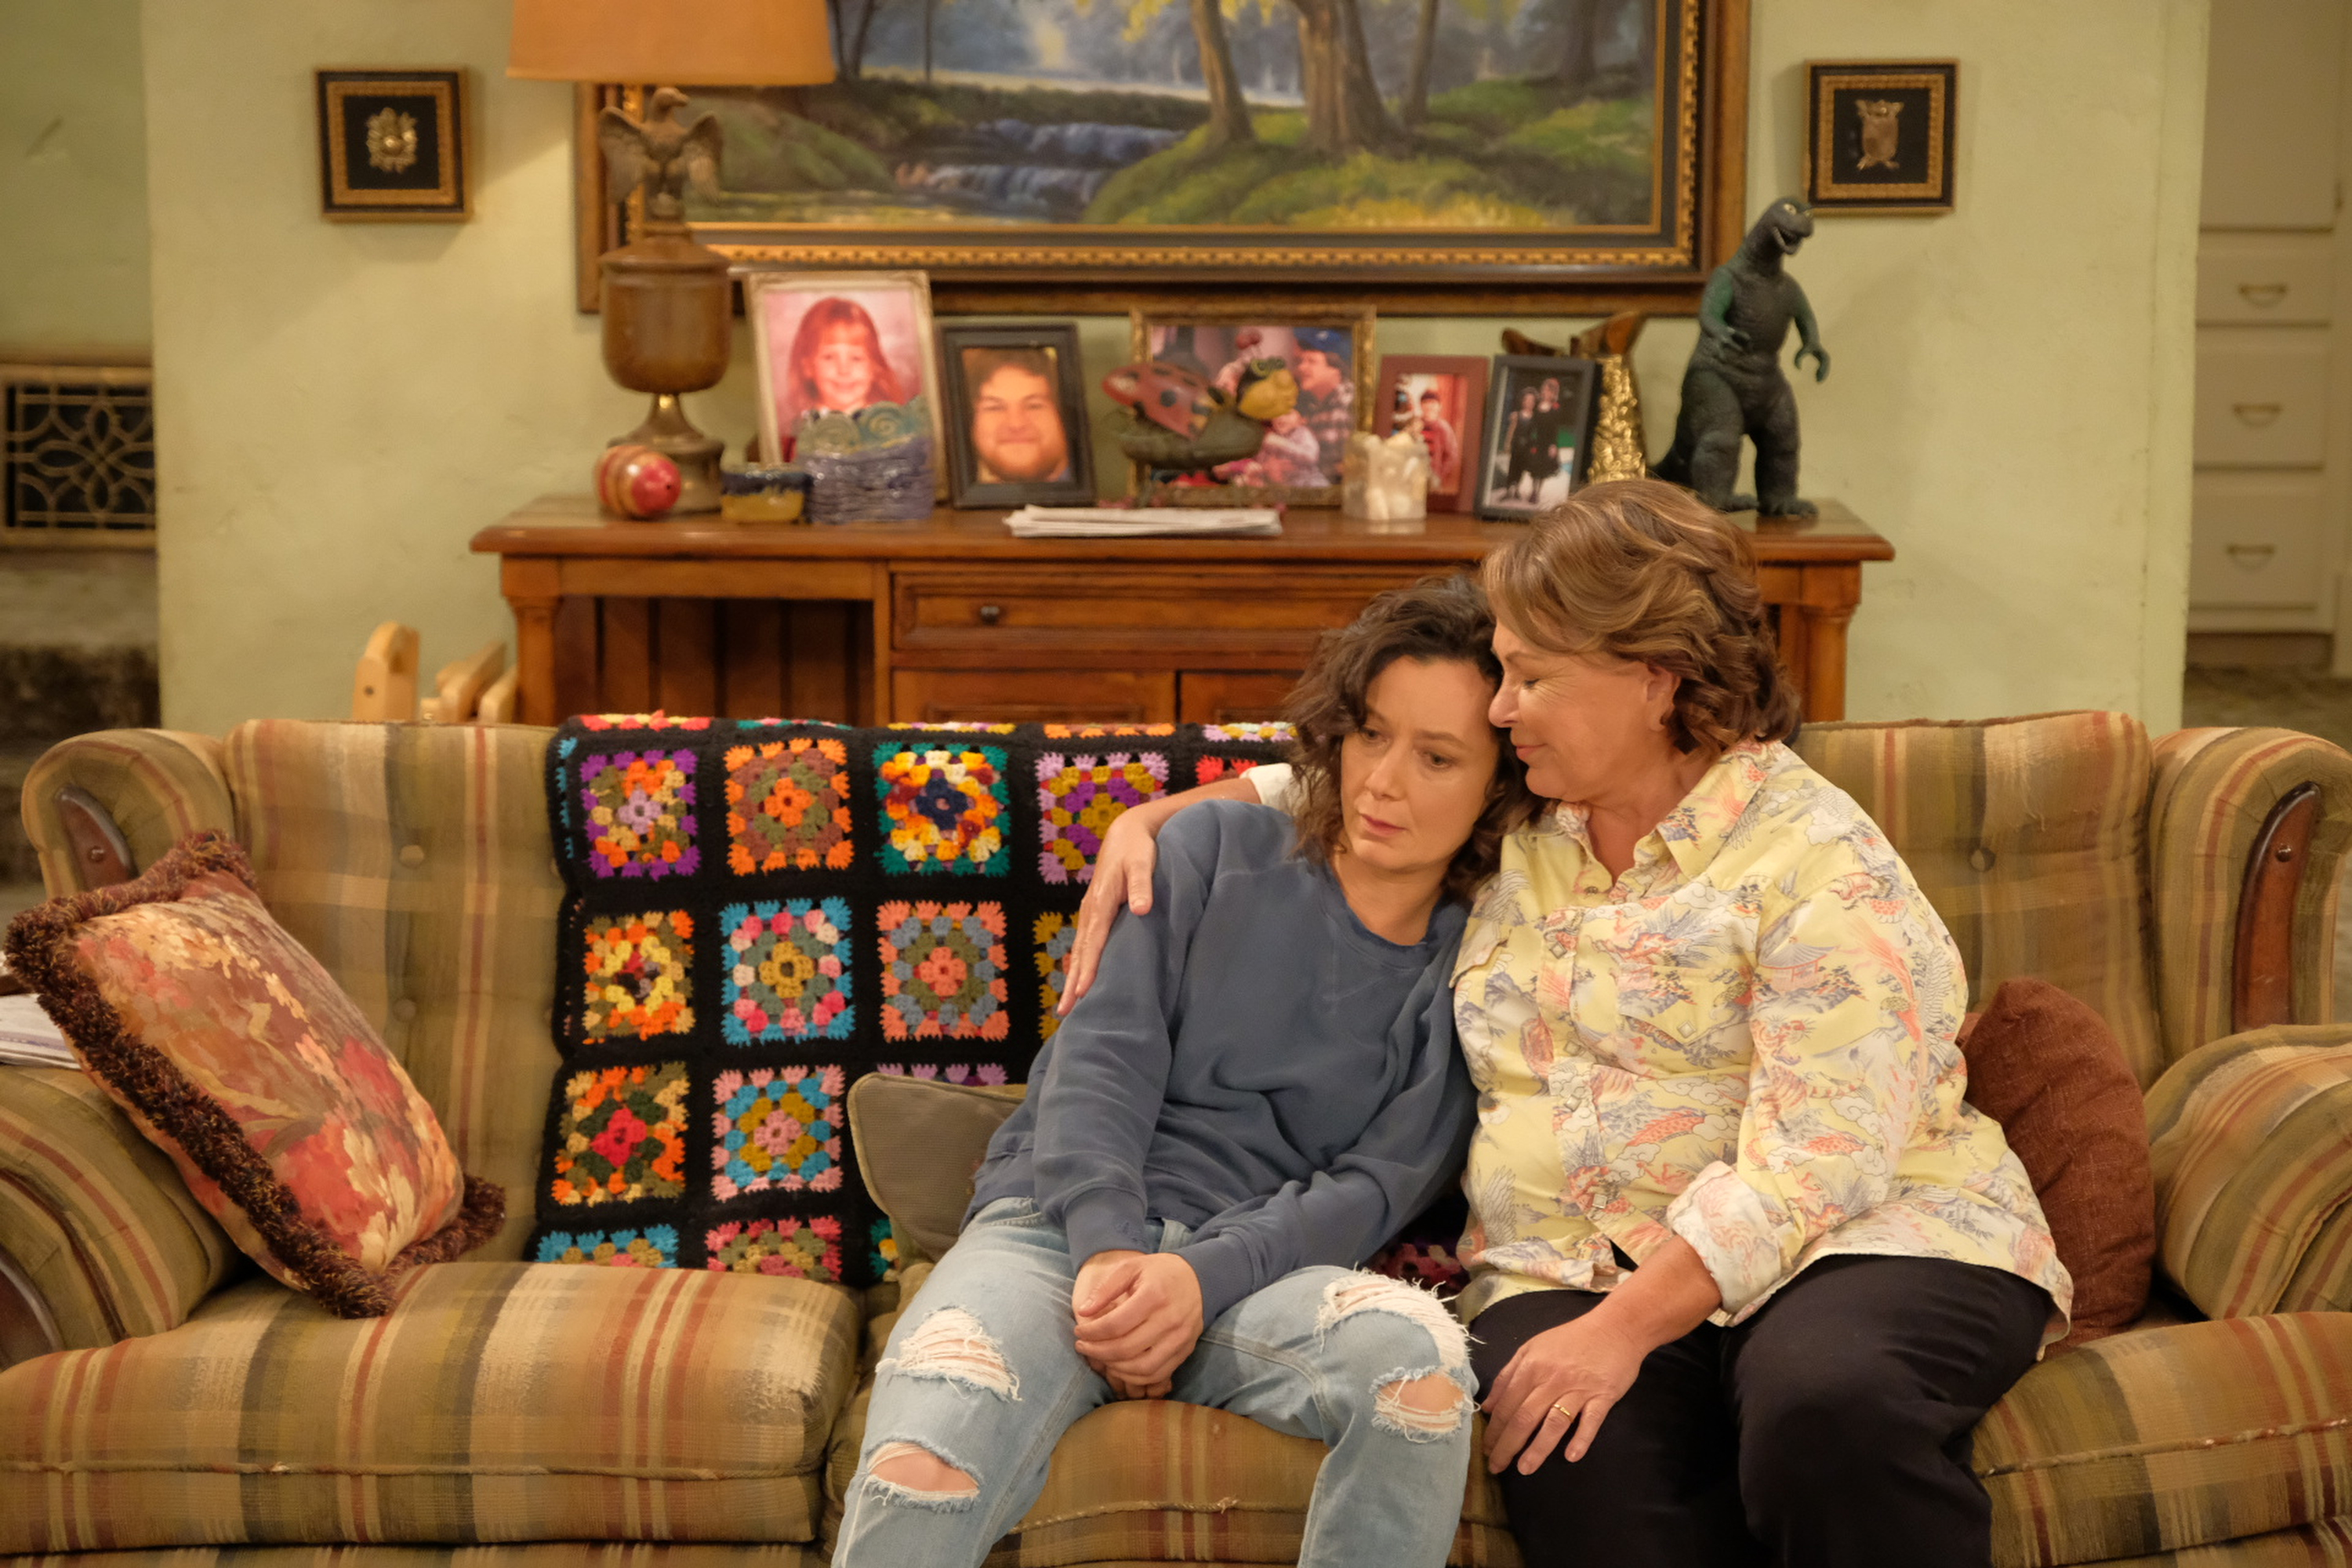 Roseanne Barr and Sara Gilbert in "Roseanne," 2017 | Source: Getty Images